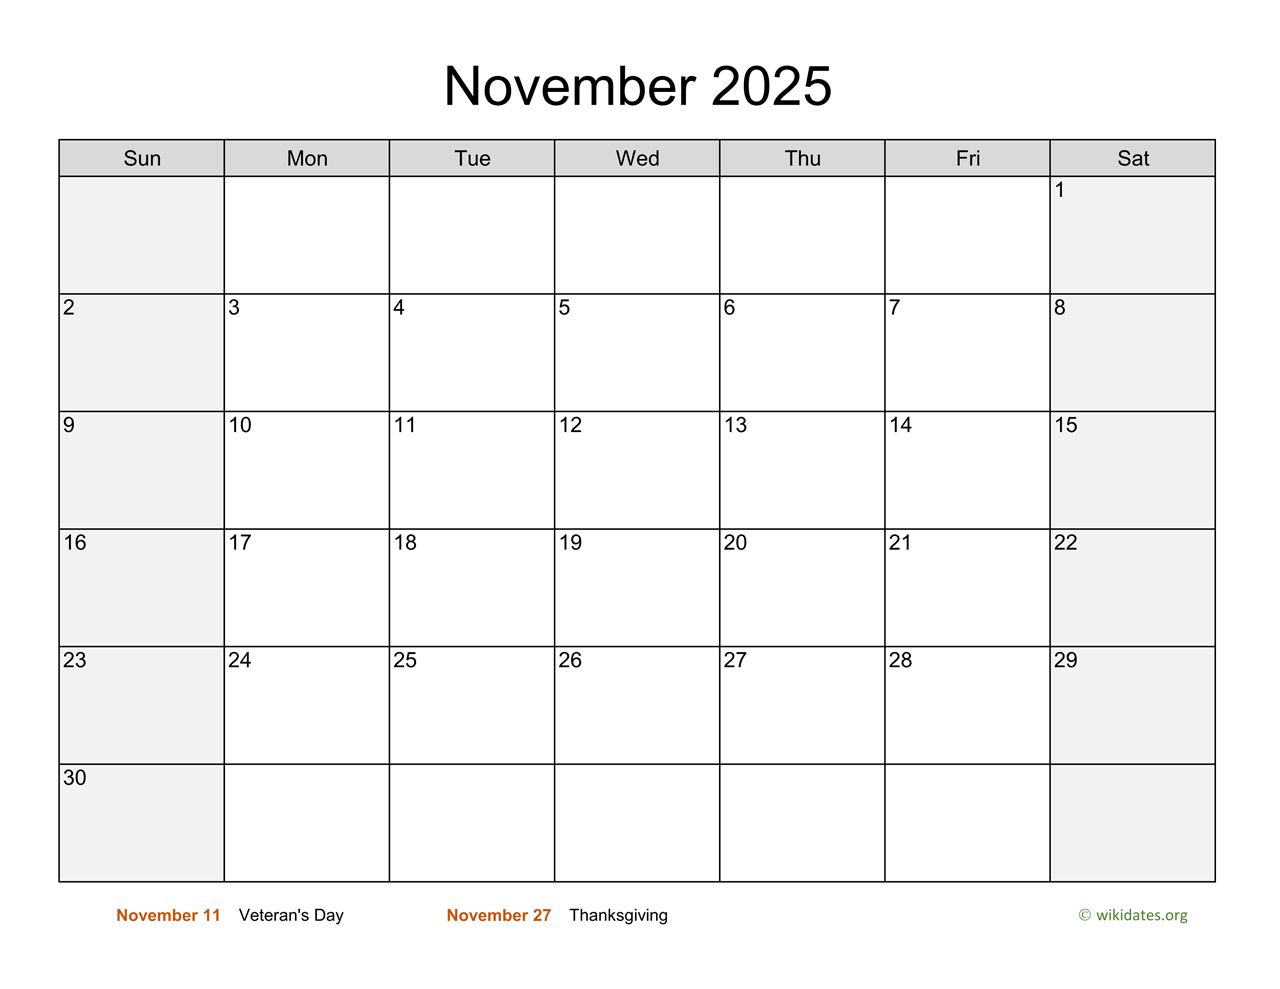 november-2025-calendar-with-weekend-shaded-wikidates